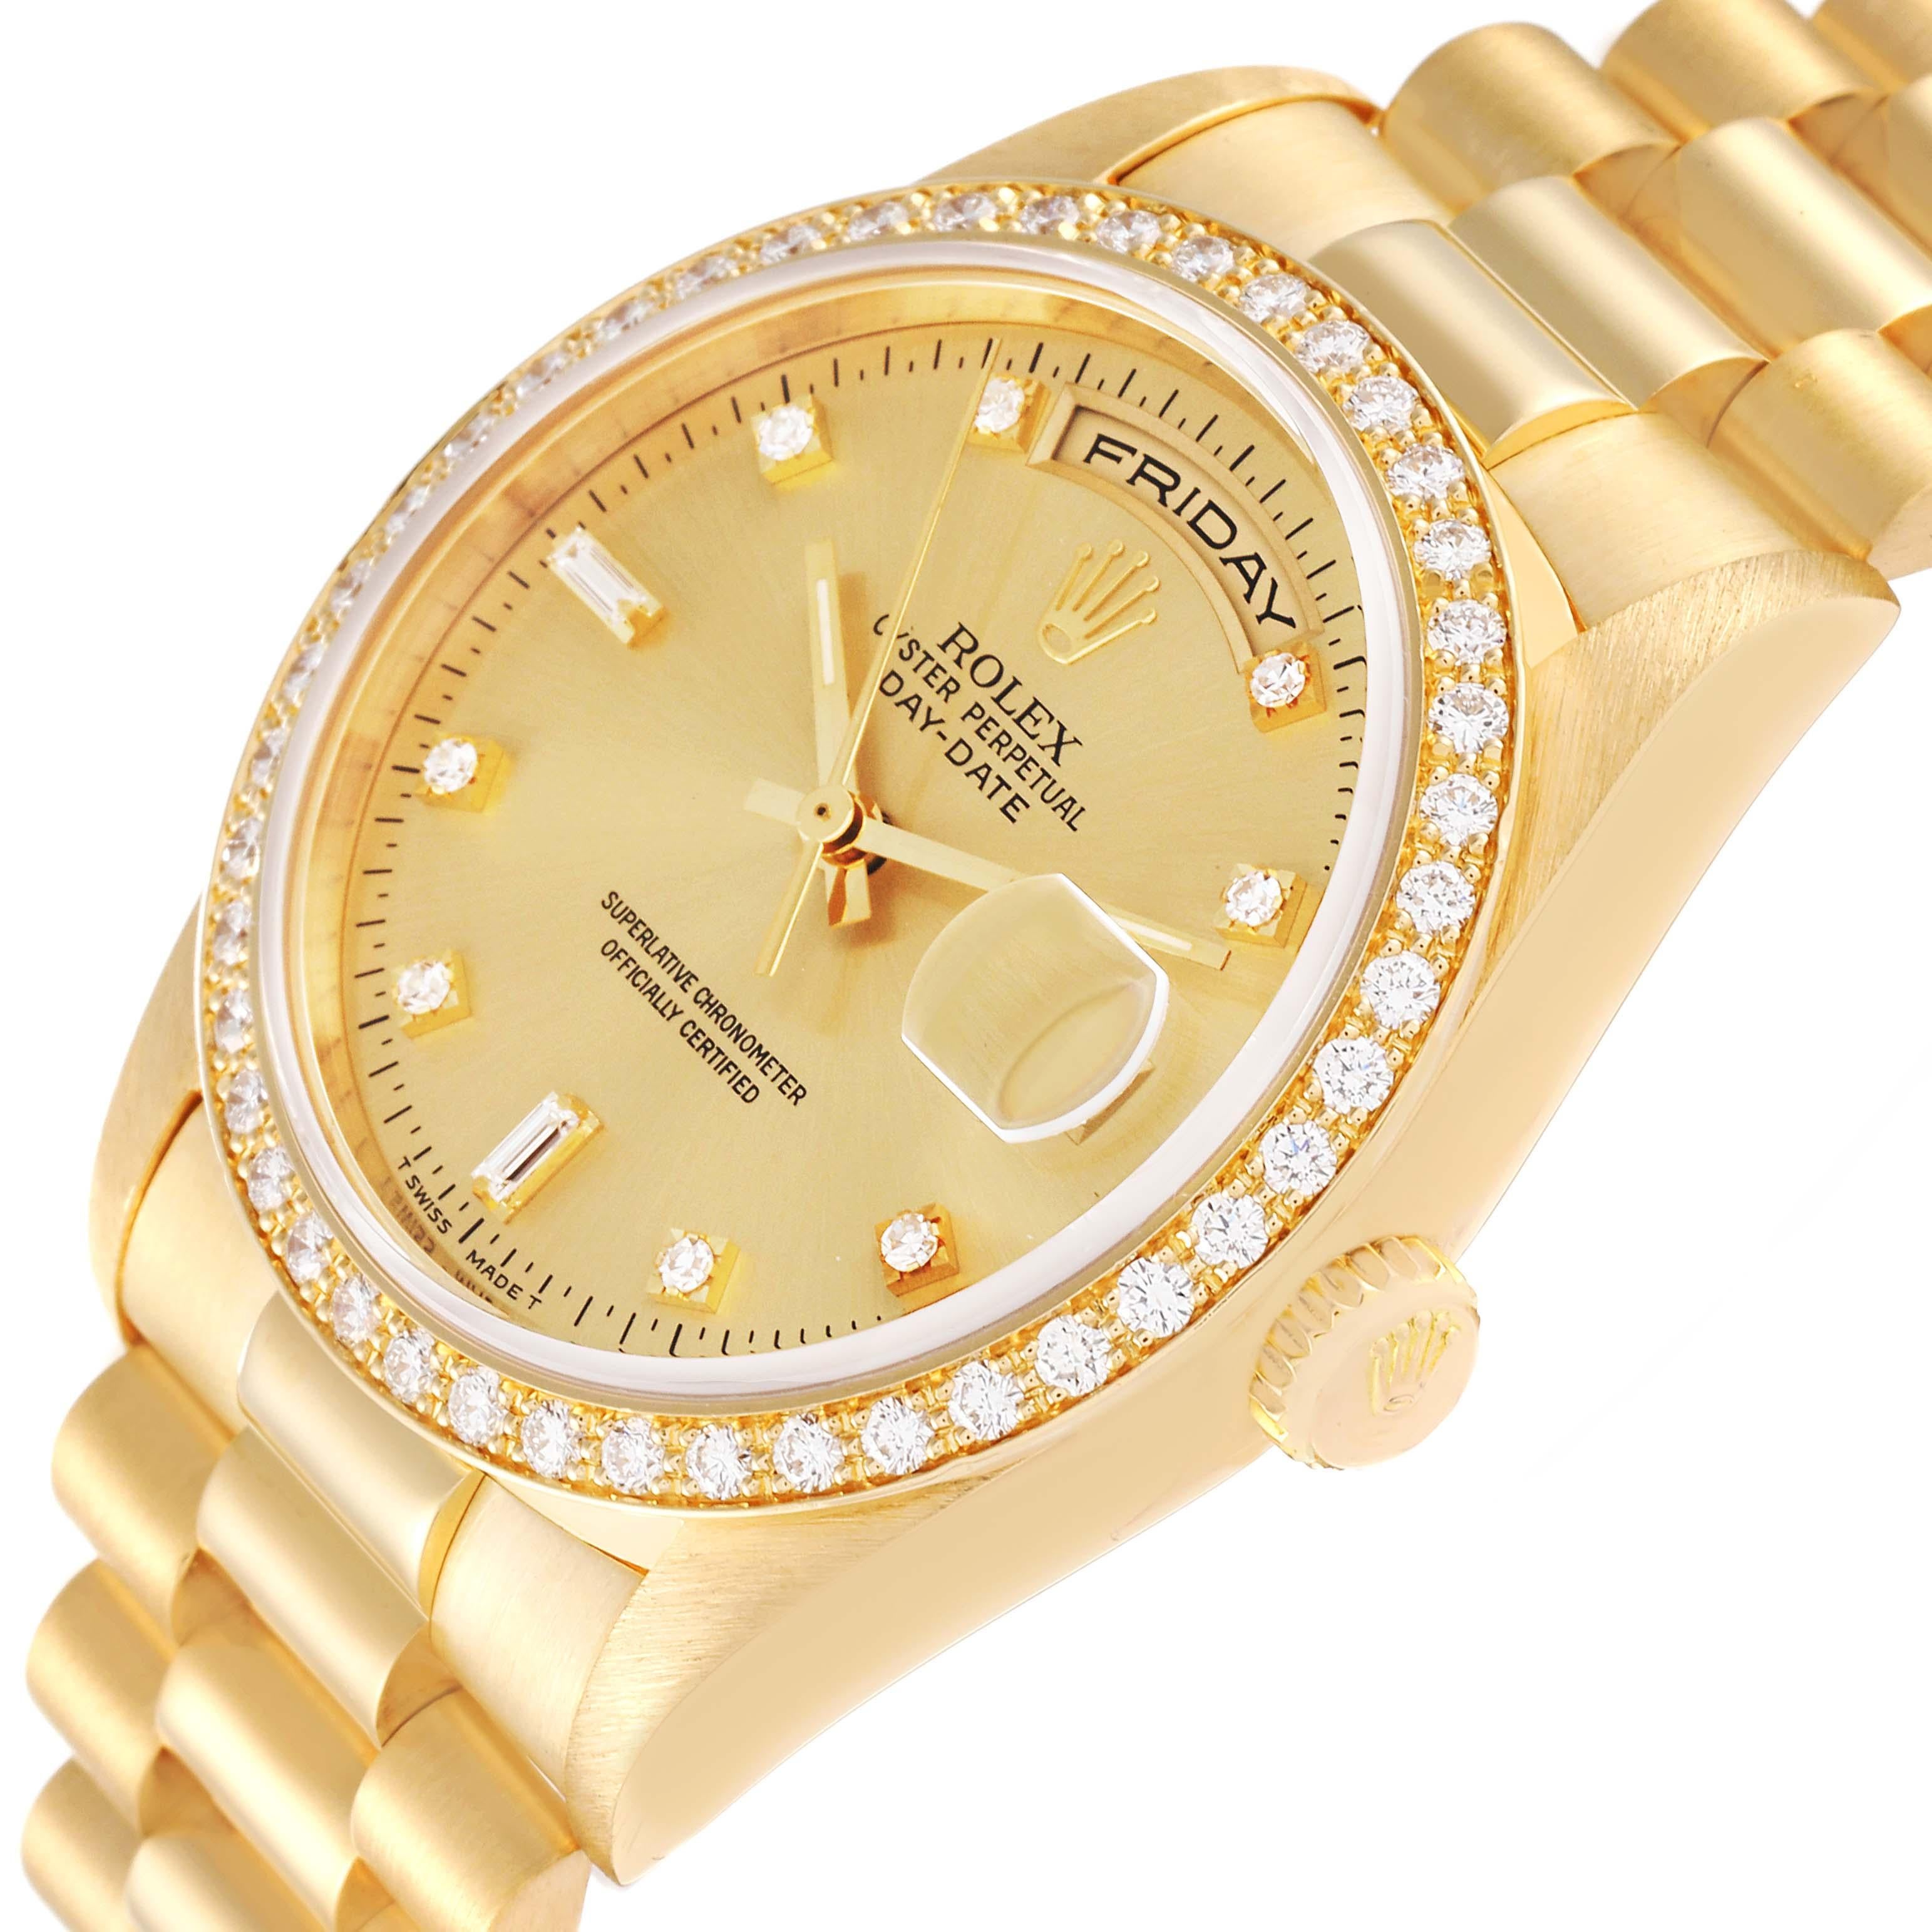 Men's Rolex President Day Date 36mm Yellow Gold Diamond Mens Watch 18348 Box Papers